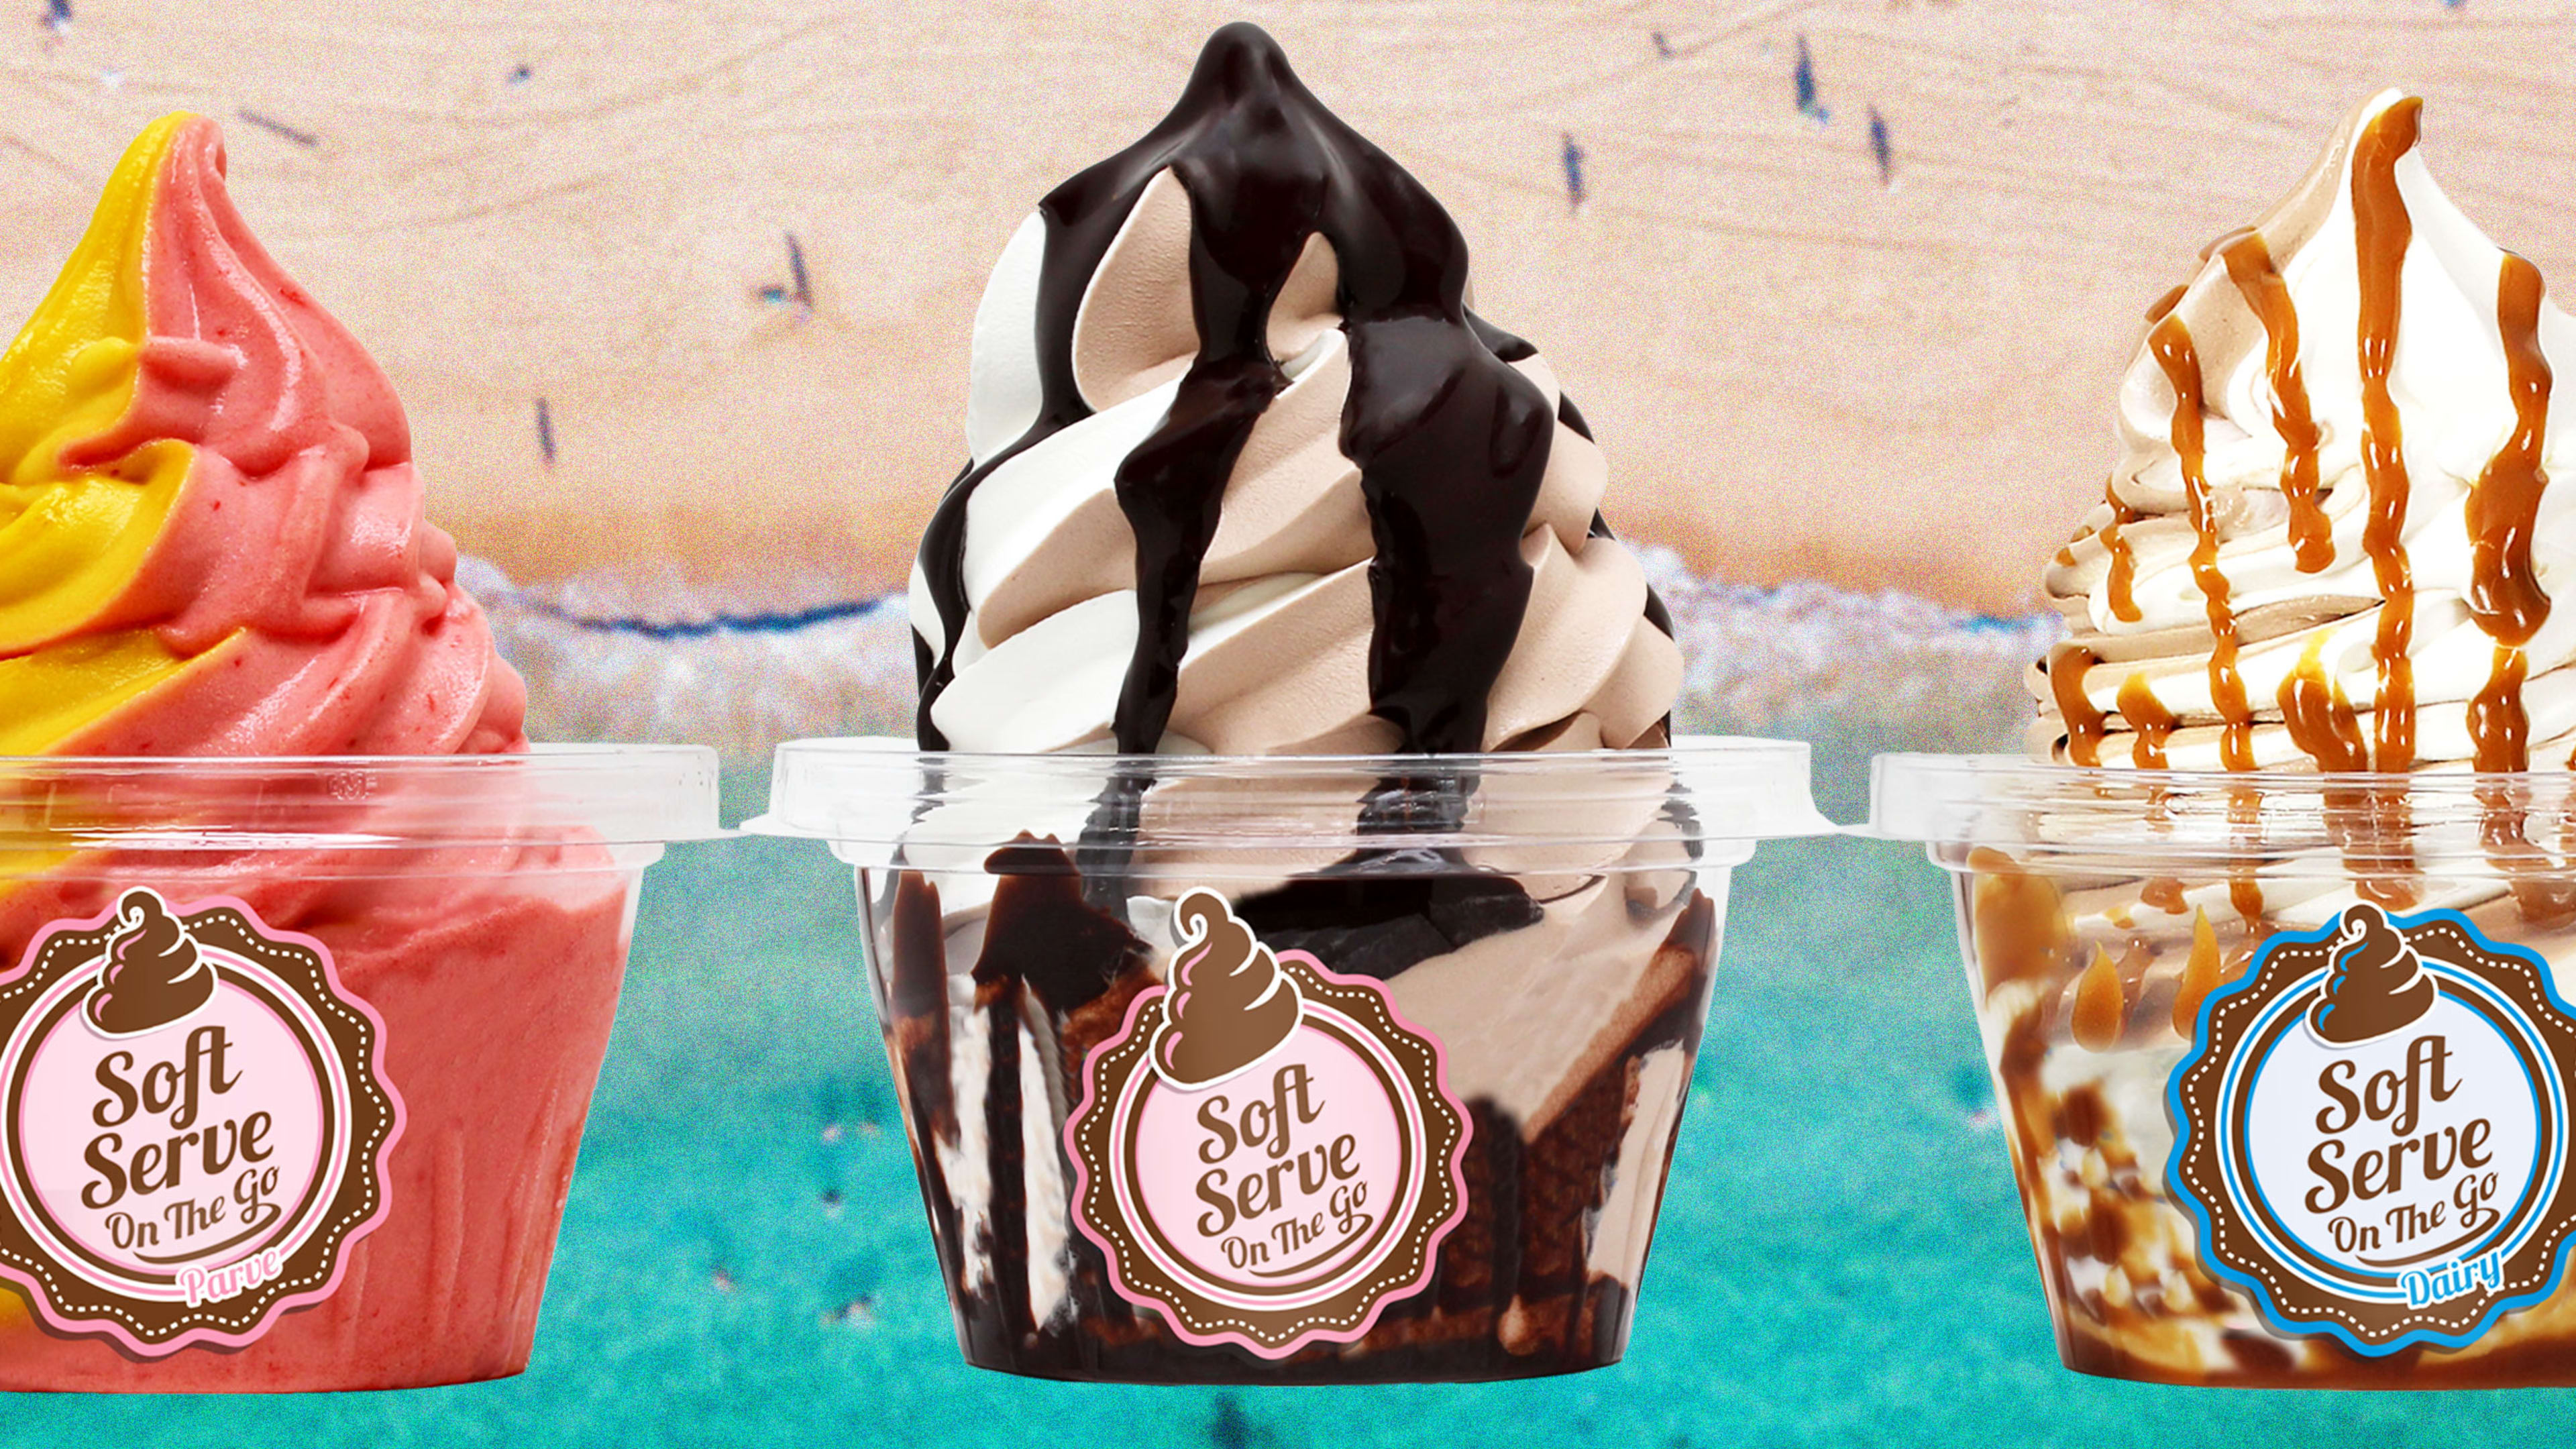 A nationwide ice cream recall is here to ruin the rest of your summer